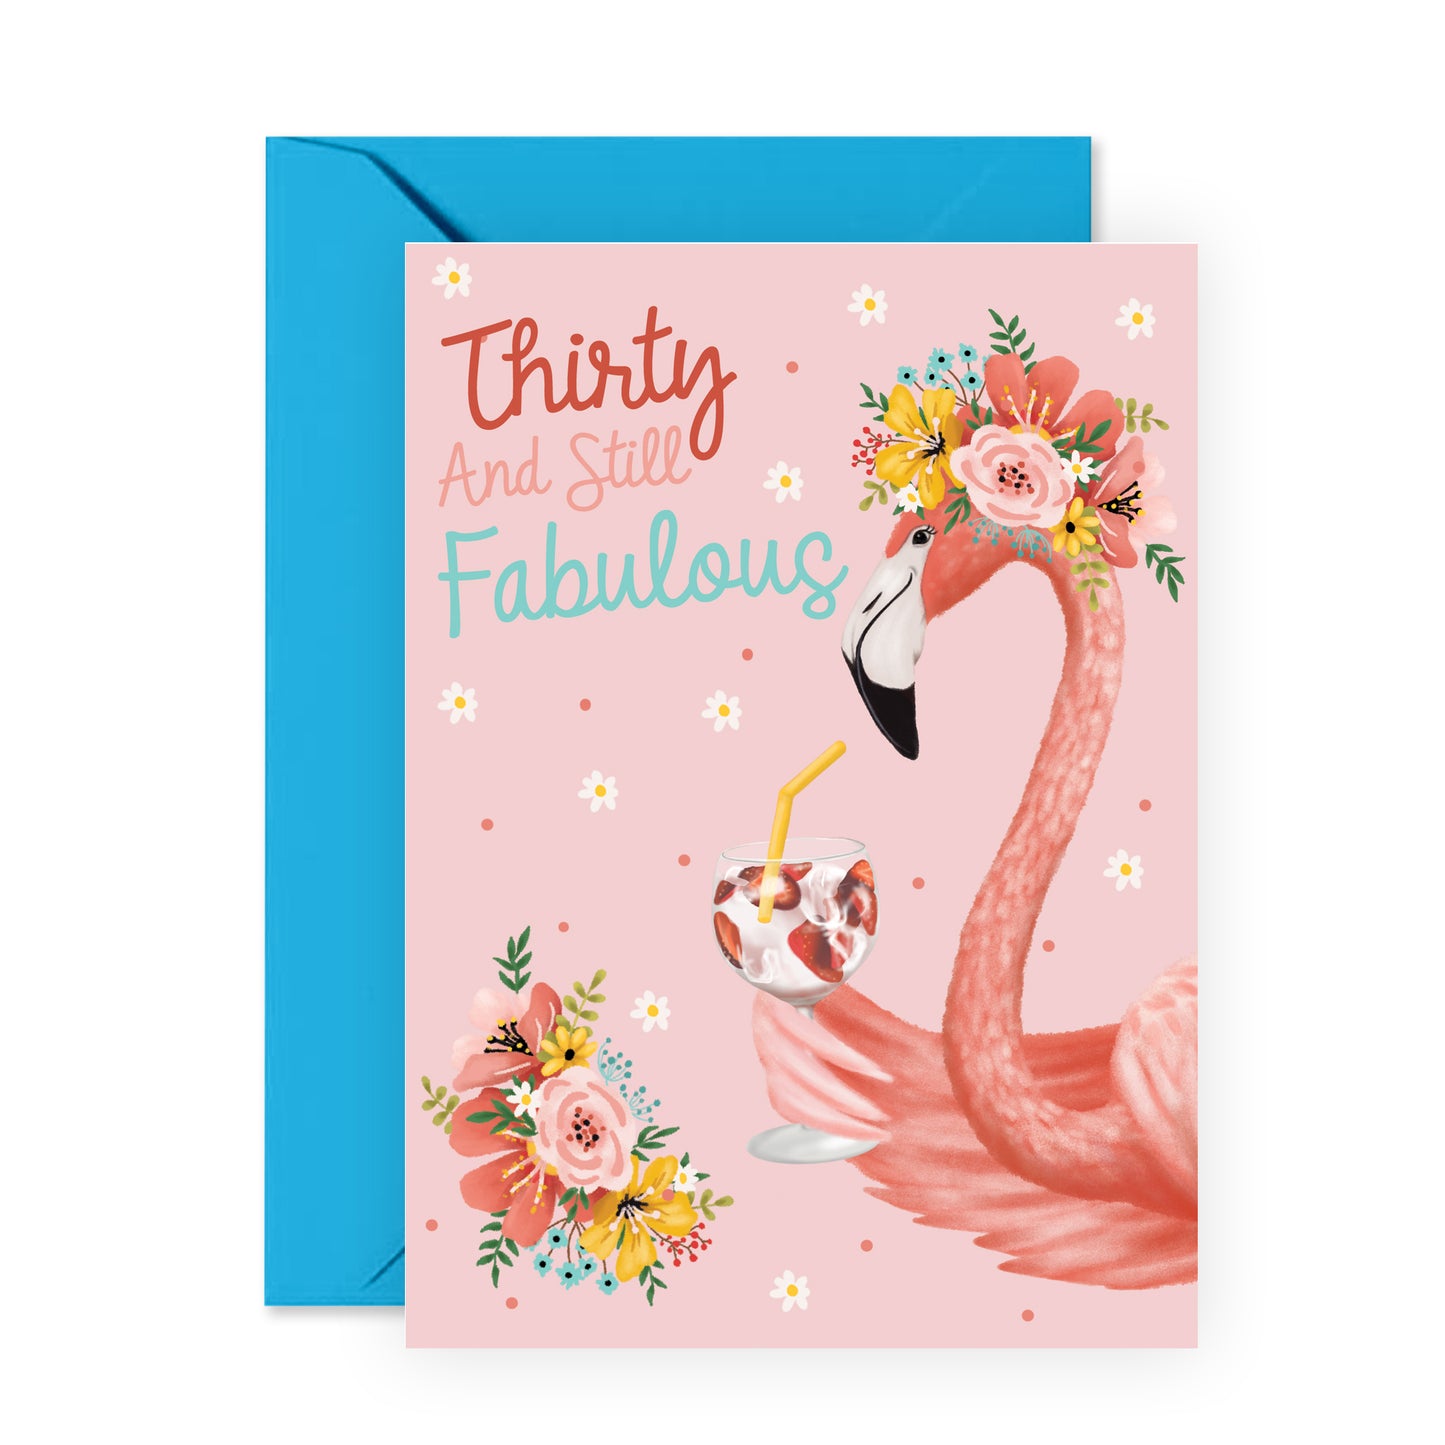 Sweet 30th Birthday Card - Thirty and Fabulous - For Women Her Wife Friends